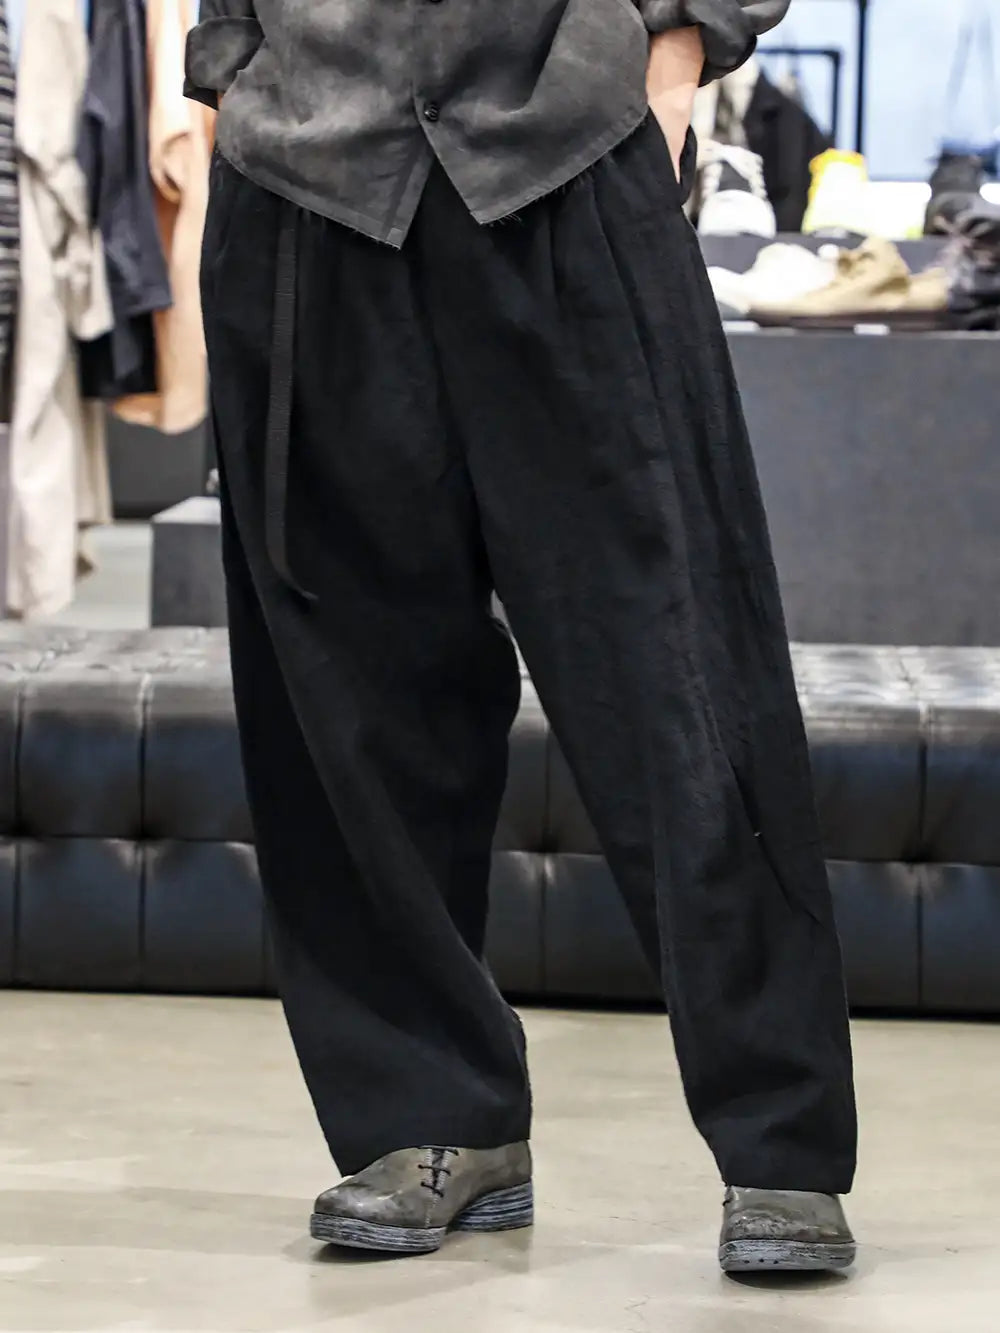 DEVOA Forme D'expression 24SS - Collaboration with refined classic pants and shoes - UP033 / 006B 2 Tucked Wide Leg Pants FWI-GDCT-Fade-Gray incarnation x DEVOA Shoe Horse Leather Garment Dye 3-001